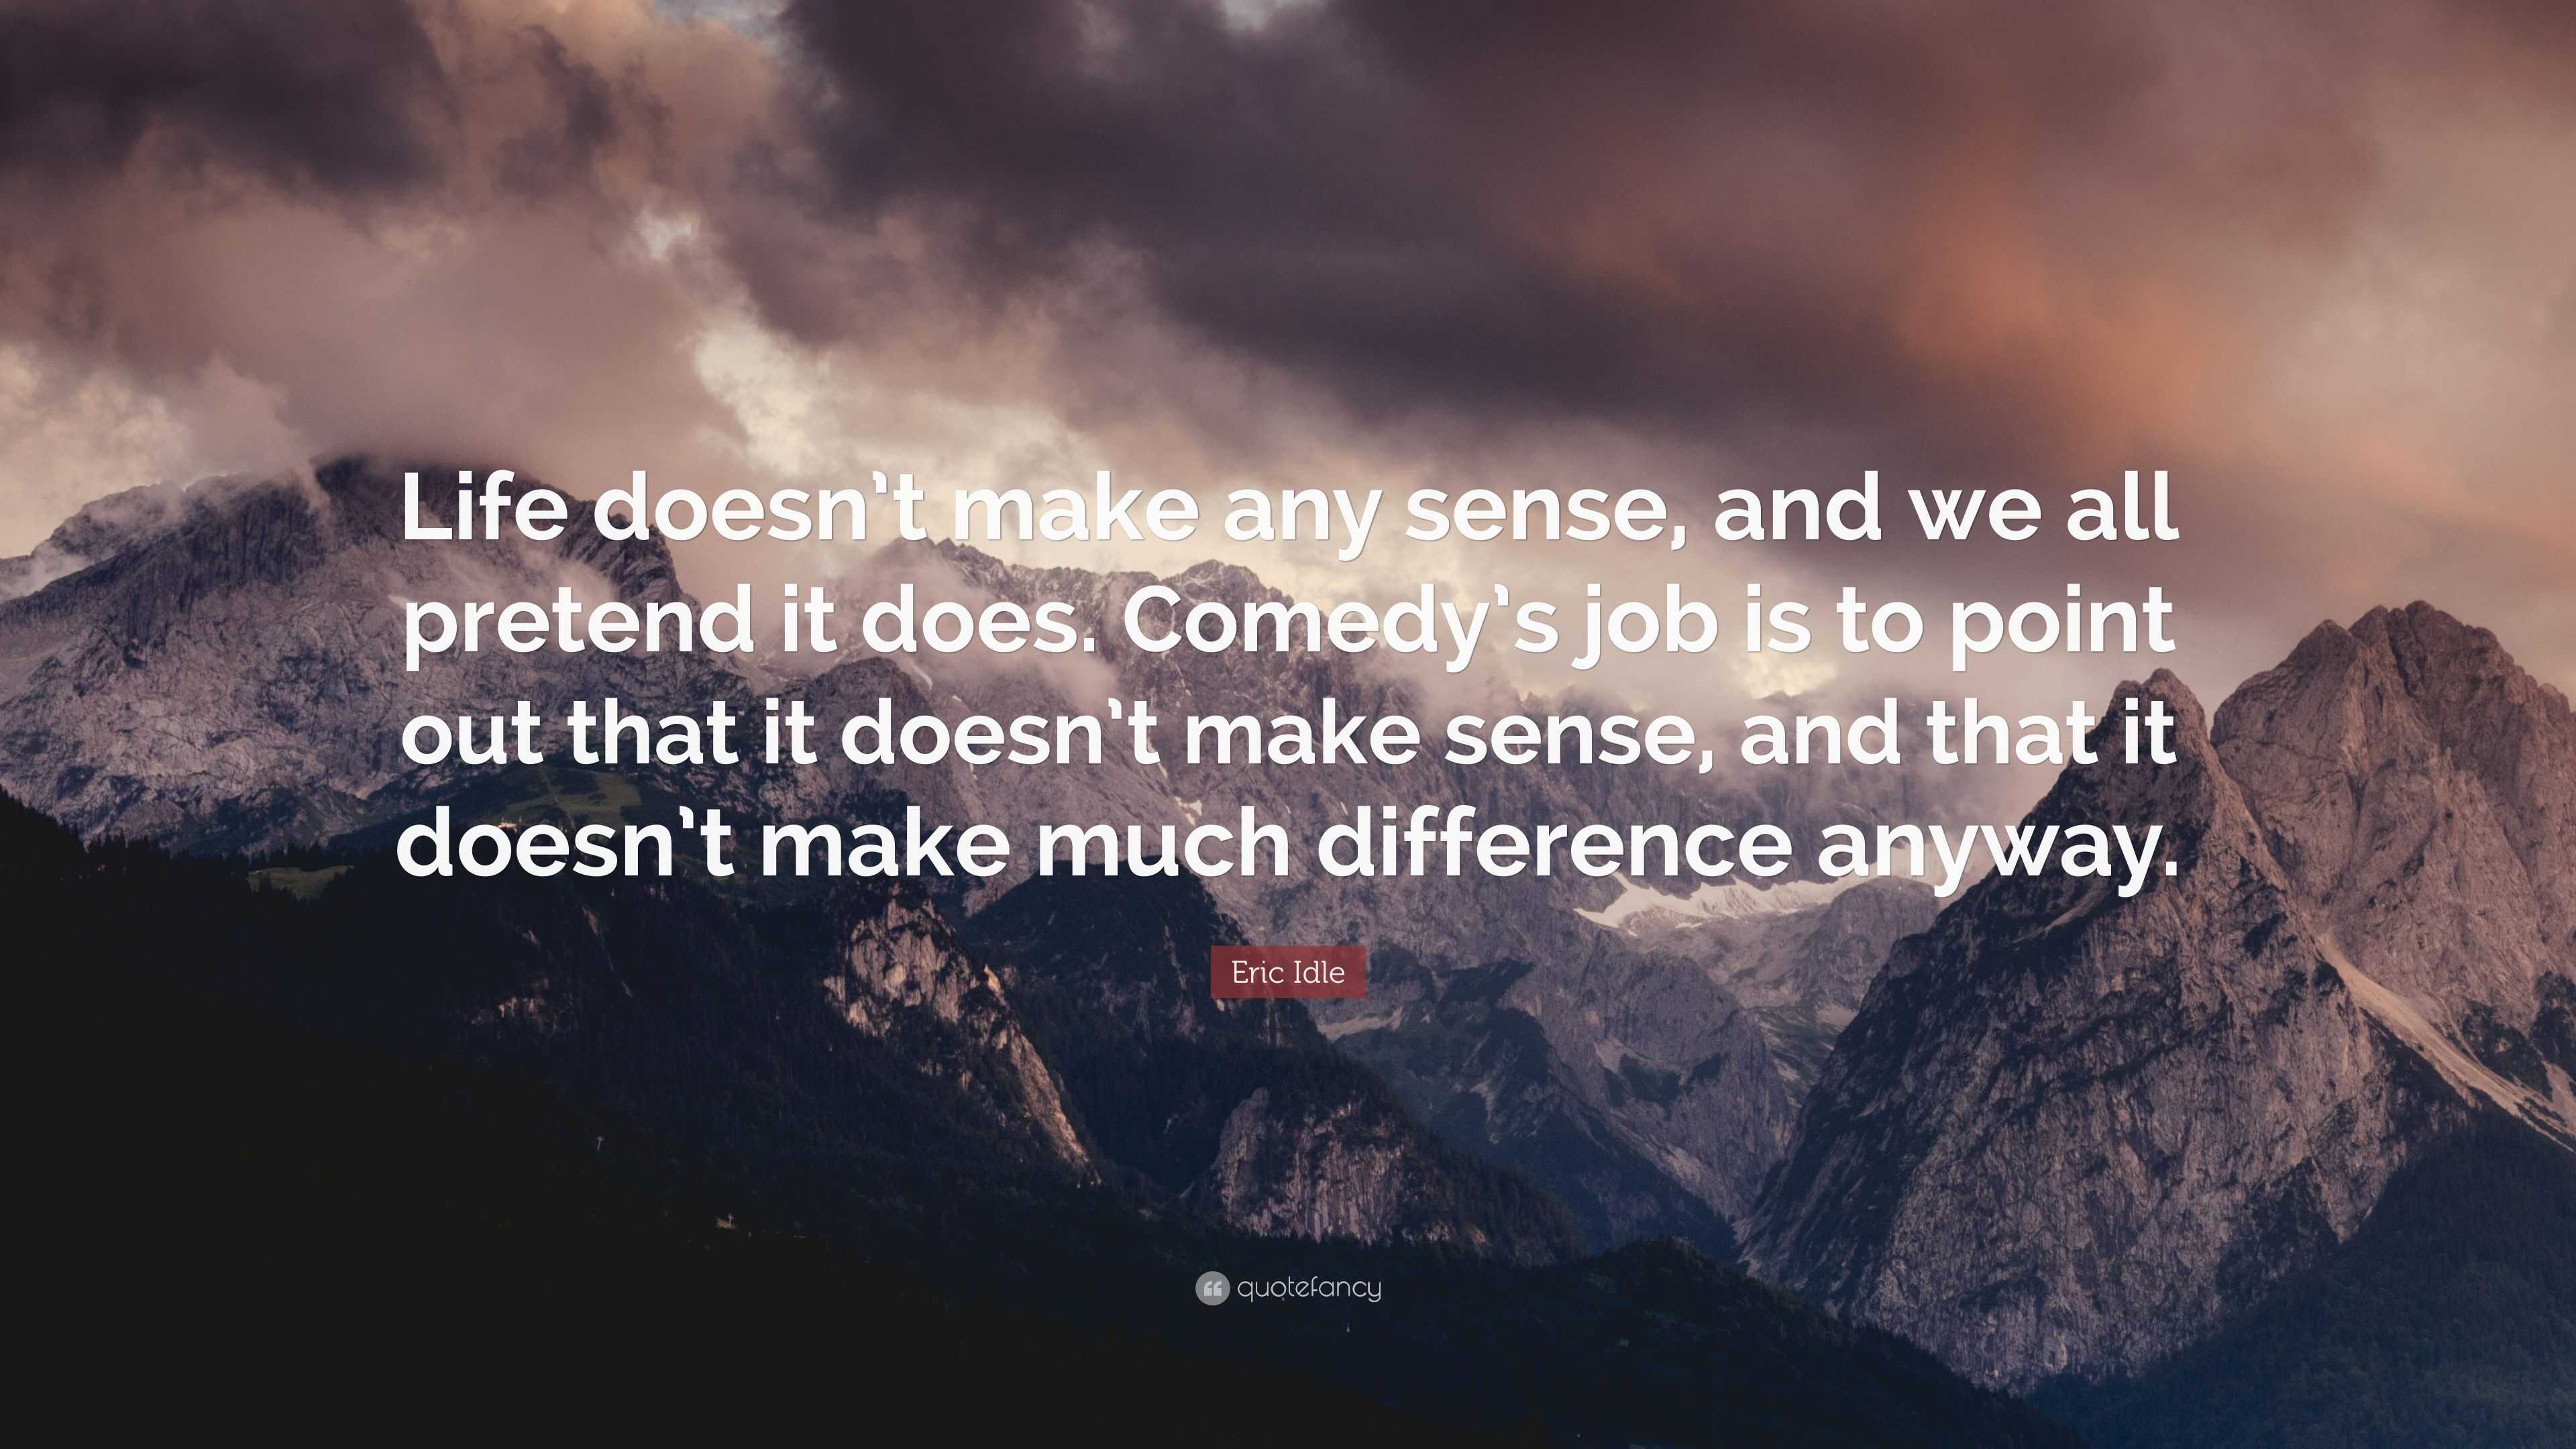 Eric Idle Quote “Life doesn t make any sense and we all